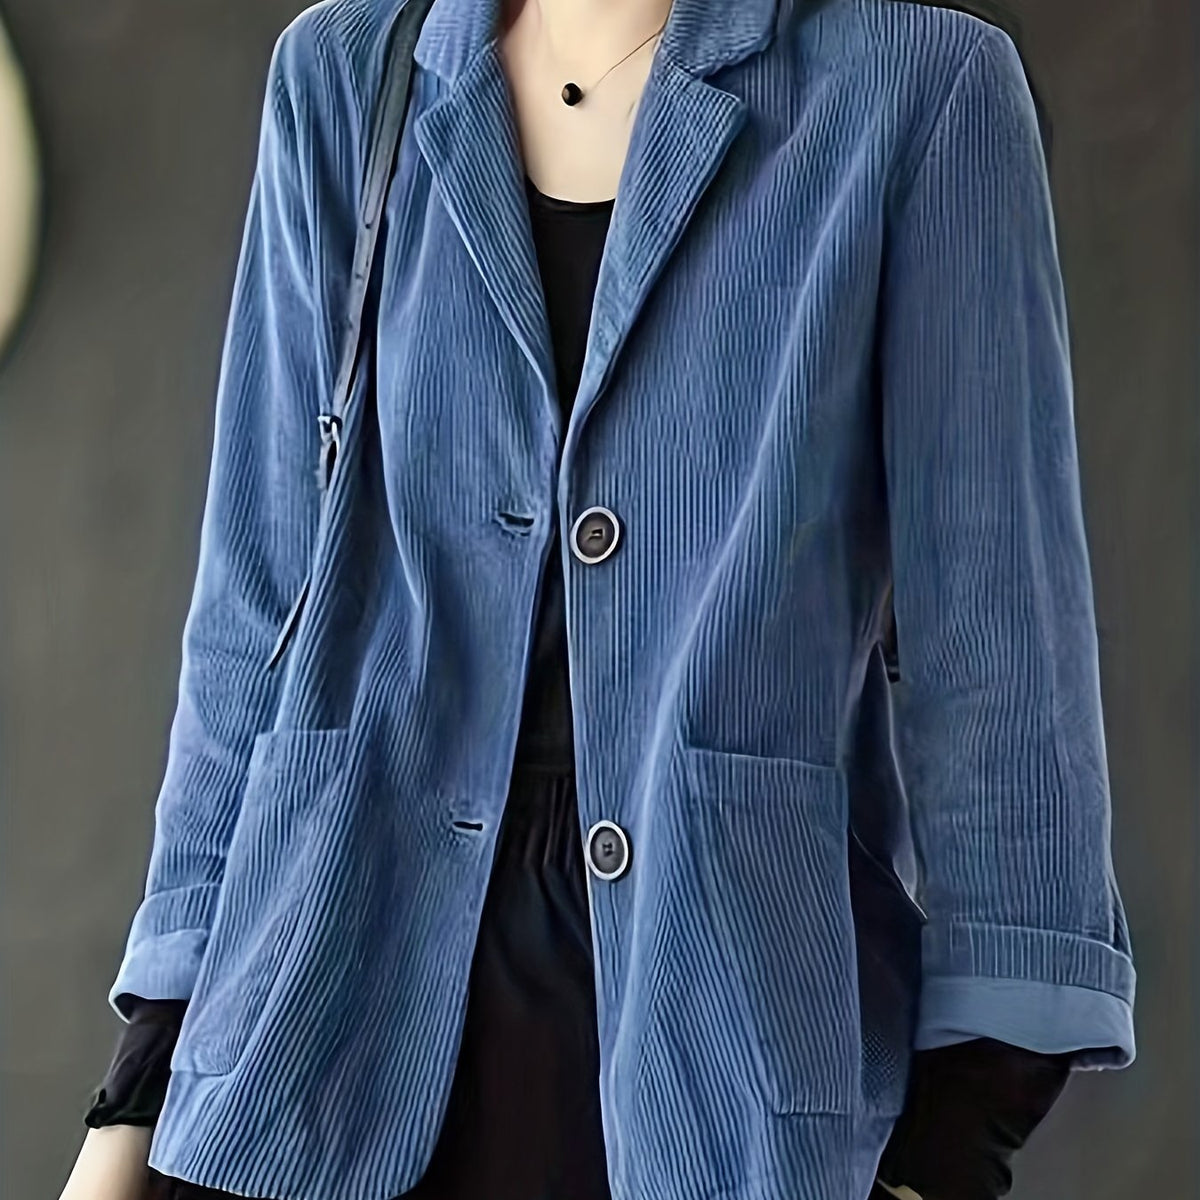 Solid Button Front Jacket, Casual Long Sleeve Pocket Front Outerwear, Women's Clothing